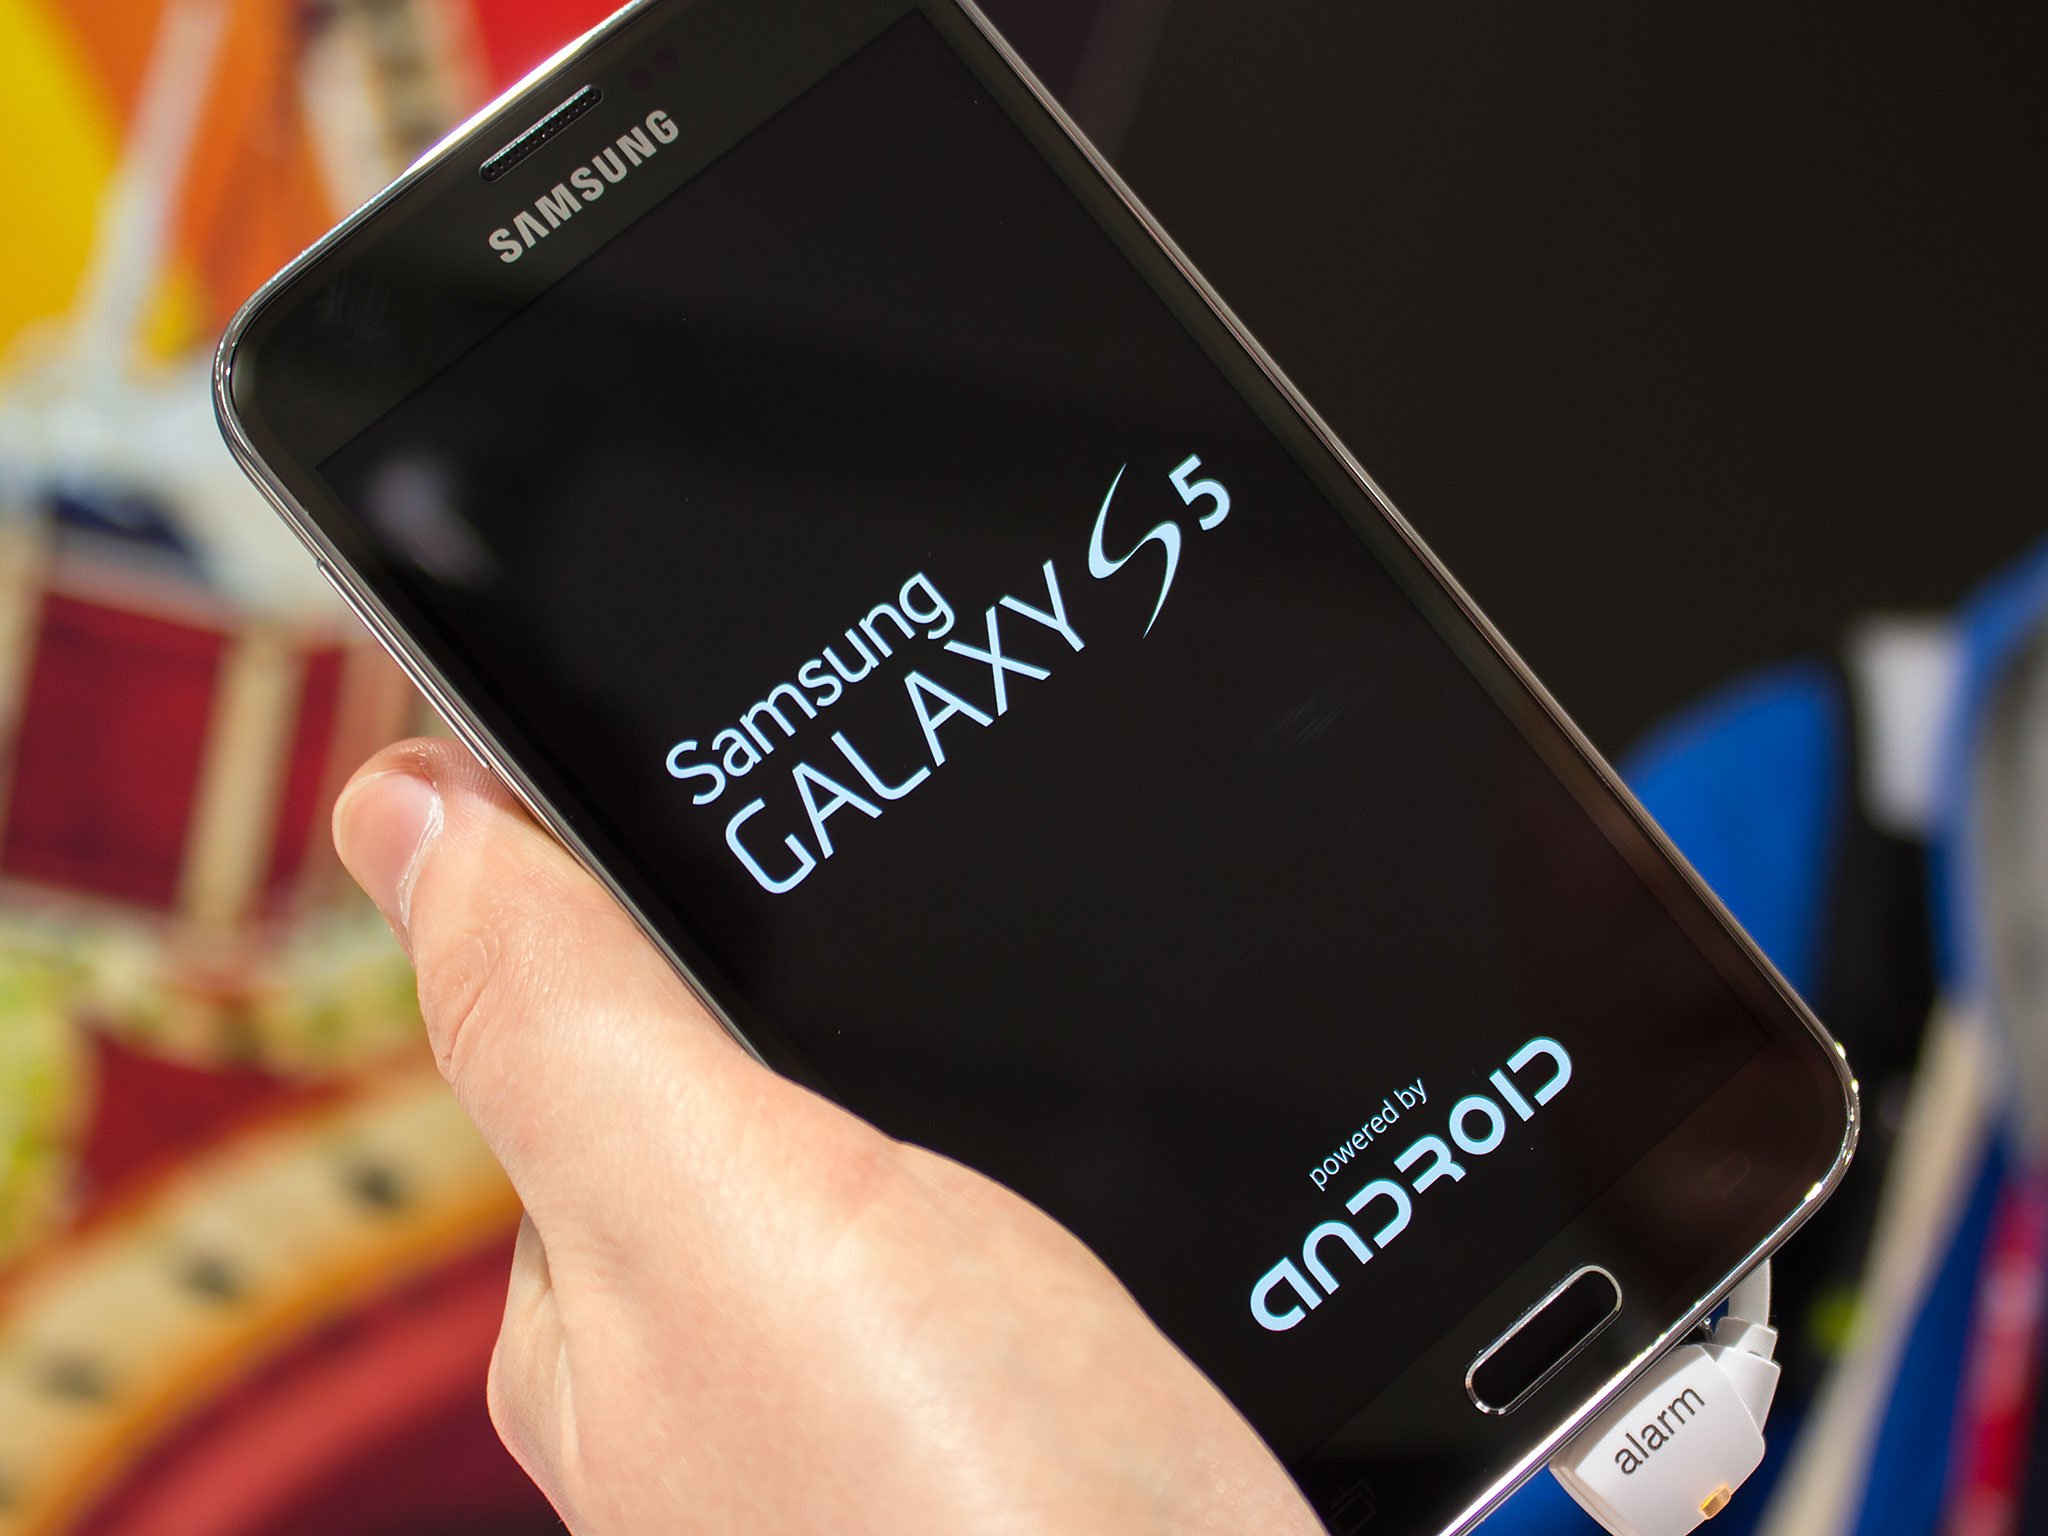 Galaxy S5 powered by Android